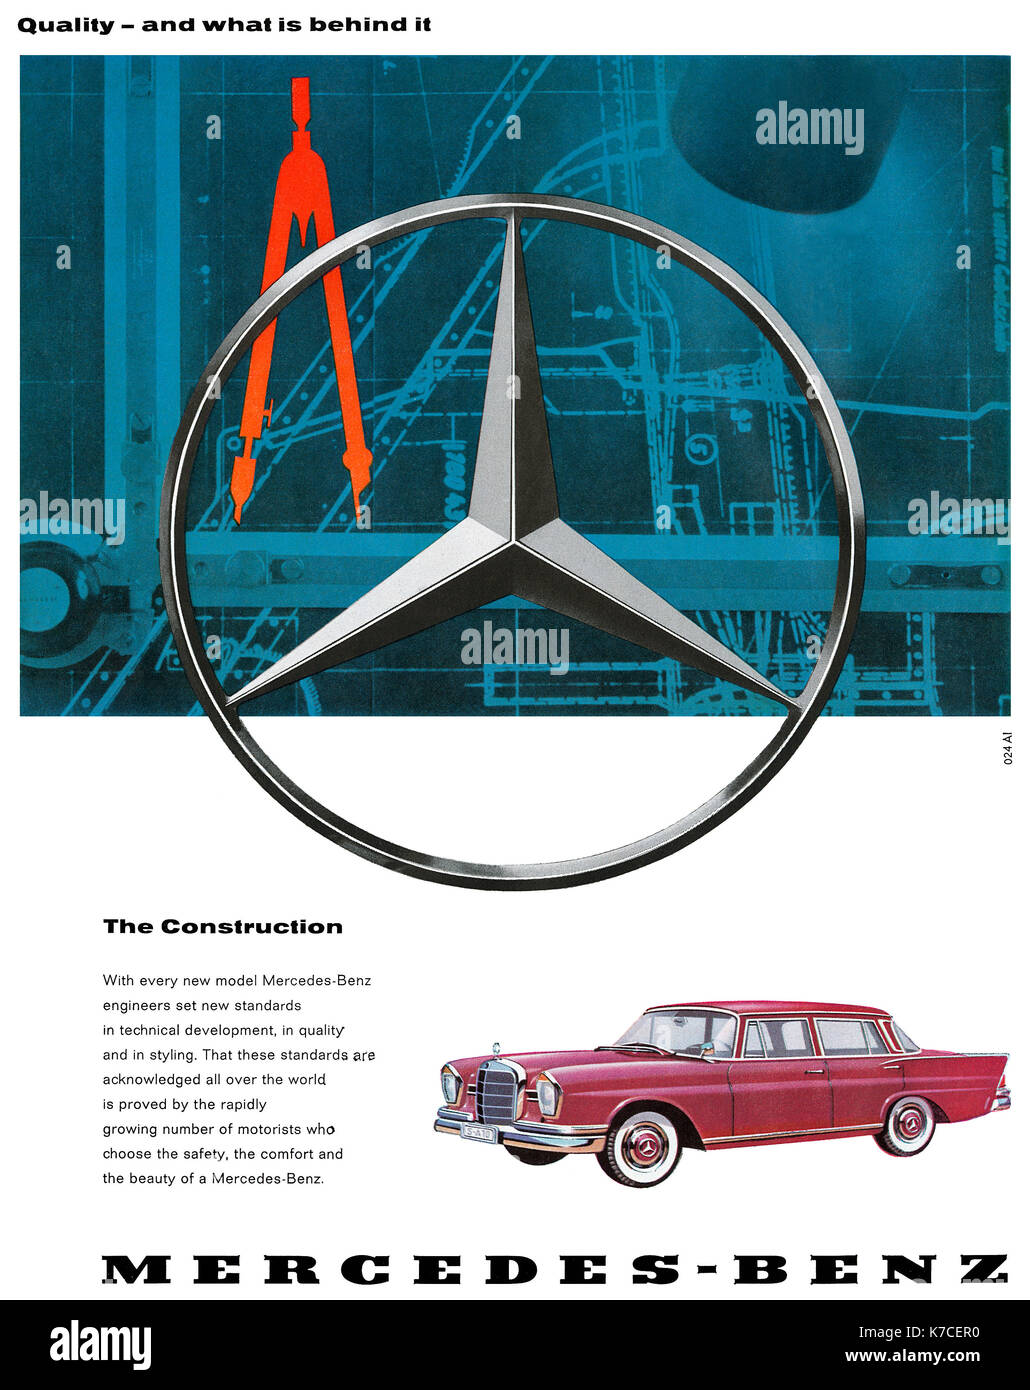 1960 British advertisement for Mercedes-Benz motor cars. Stock Photo